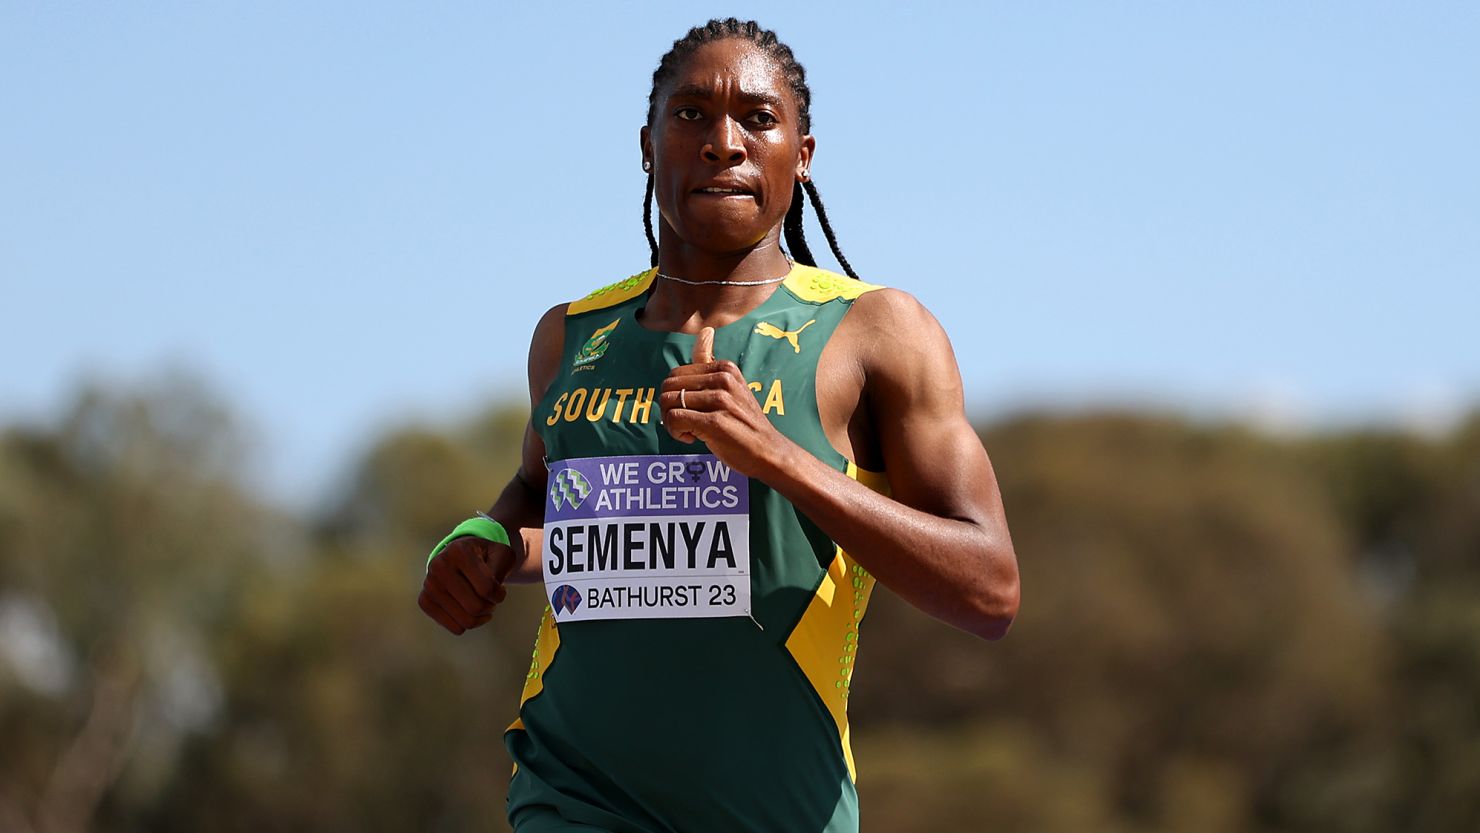 BATHURST, AUSTRALIA - FEBRUARY 18: Caster Semenya of Team South Africa competes in the Mixed Relay race during the 2023 World Cross Country Championships at Mount Panorama on February 18, 2023 in Bathurst, Australia. (Photo by Cameron Spencer/Getty Images for World Athletics )